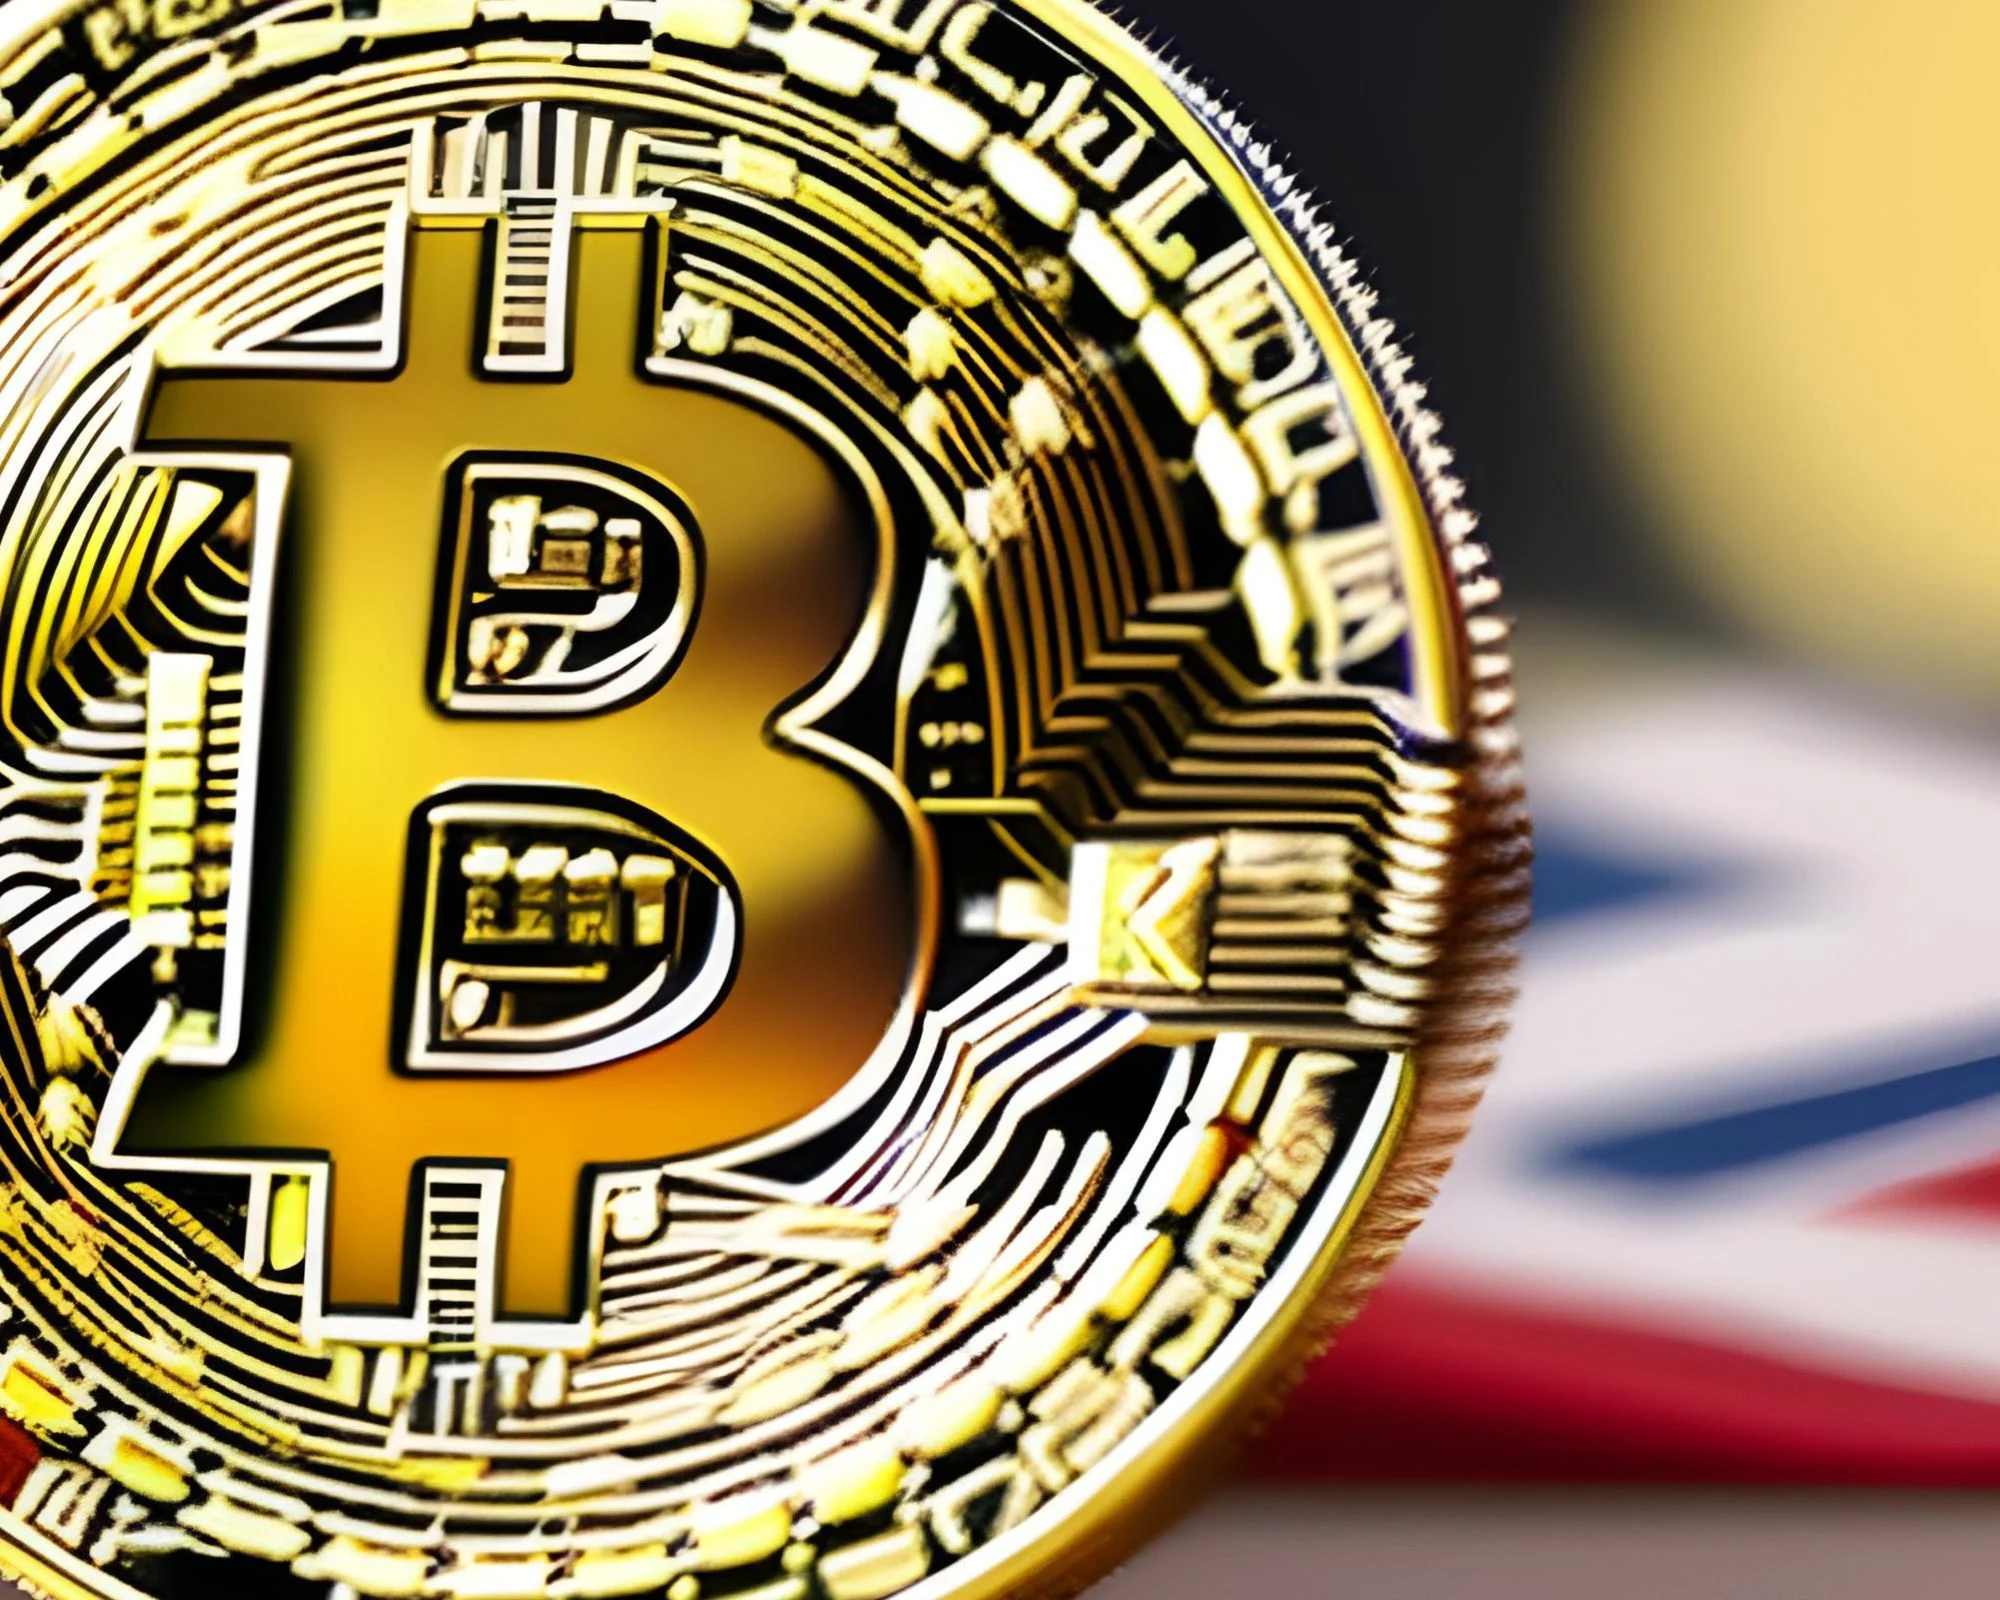 UK's Crypto Regulation Bill: A Brave Step Forward or a Desperate Attempt to Control the Uncontrollable?